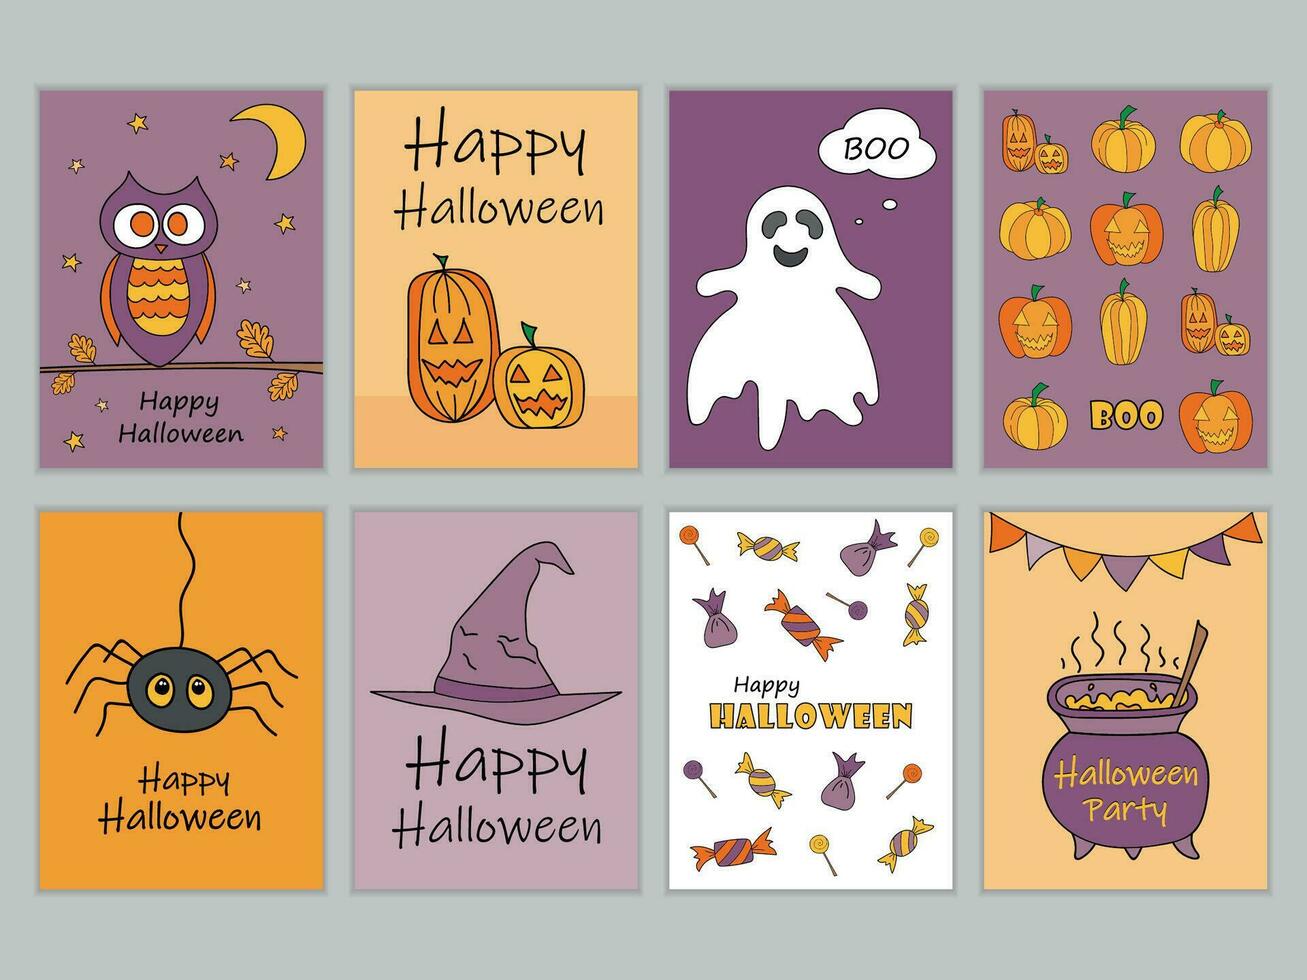 Halloween greeting Cards and Posters set in Doodle style. Vector illustration